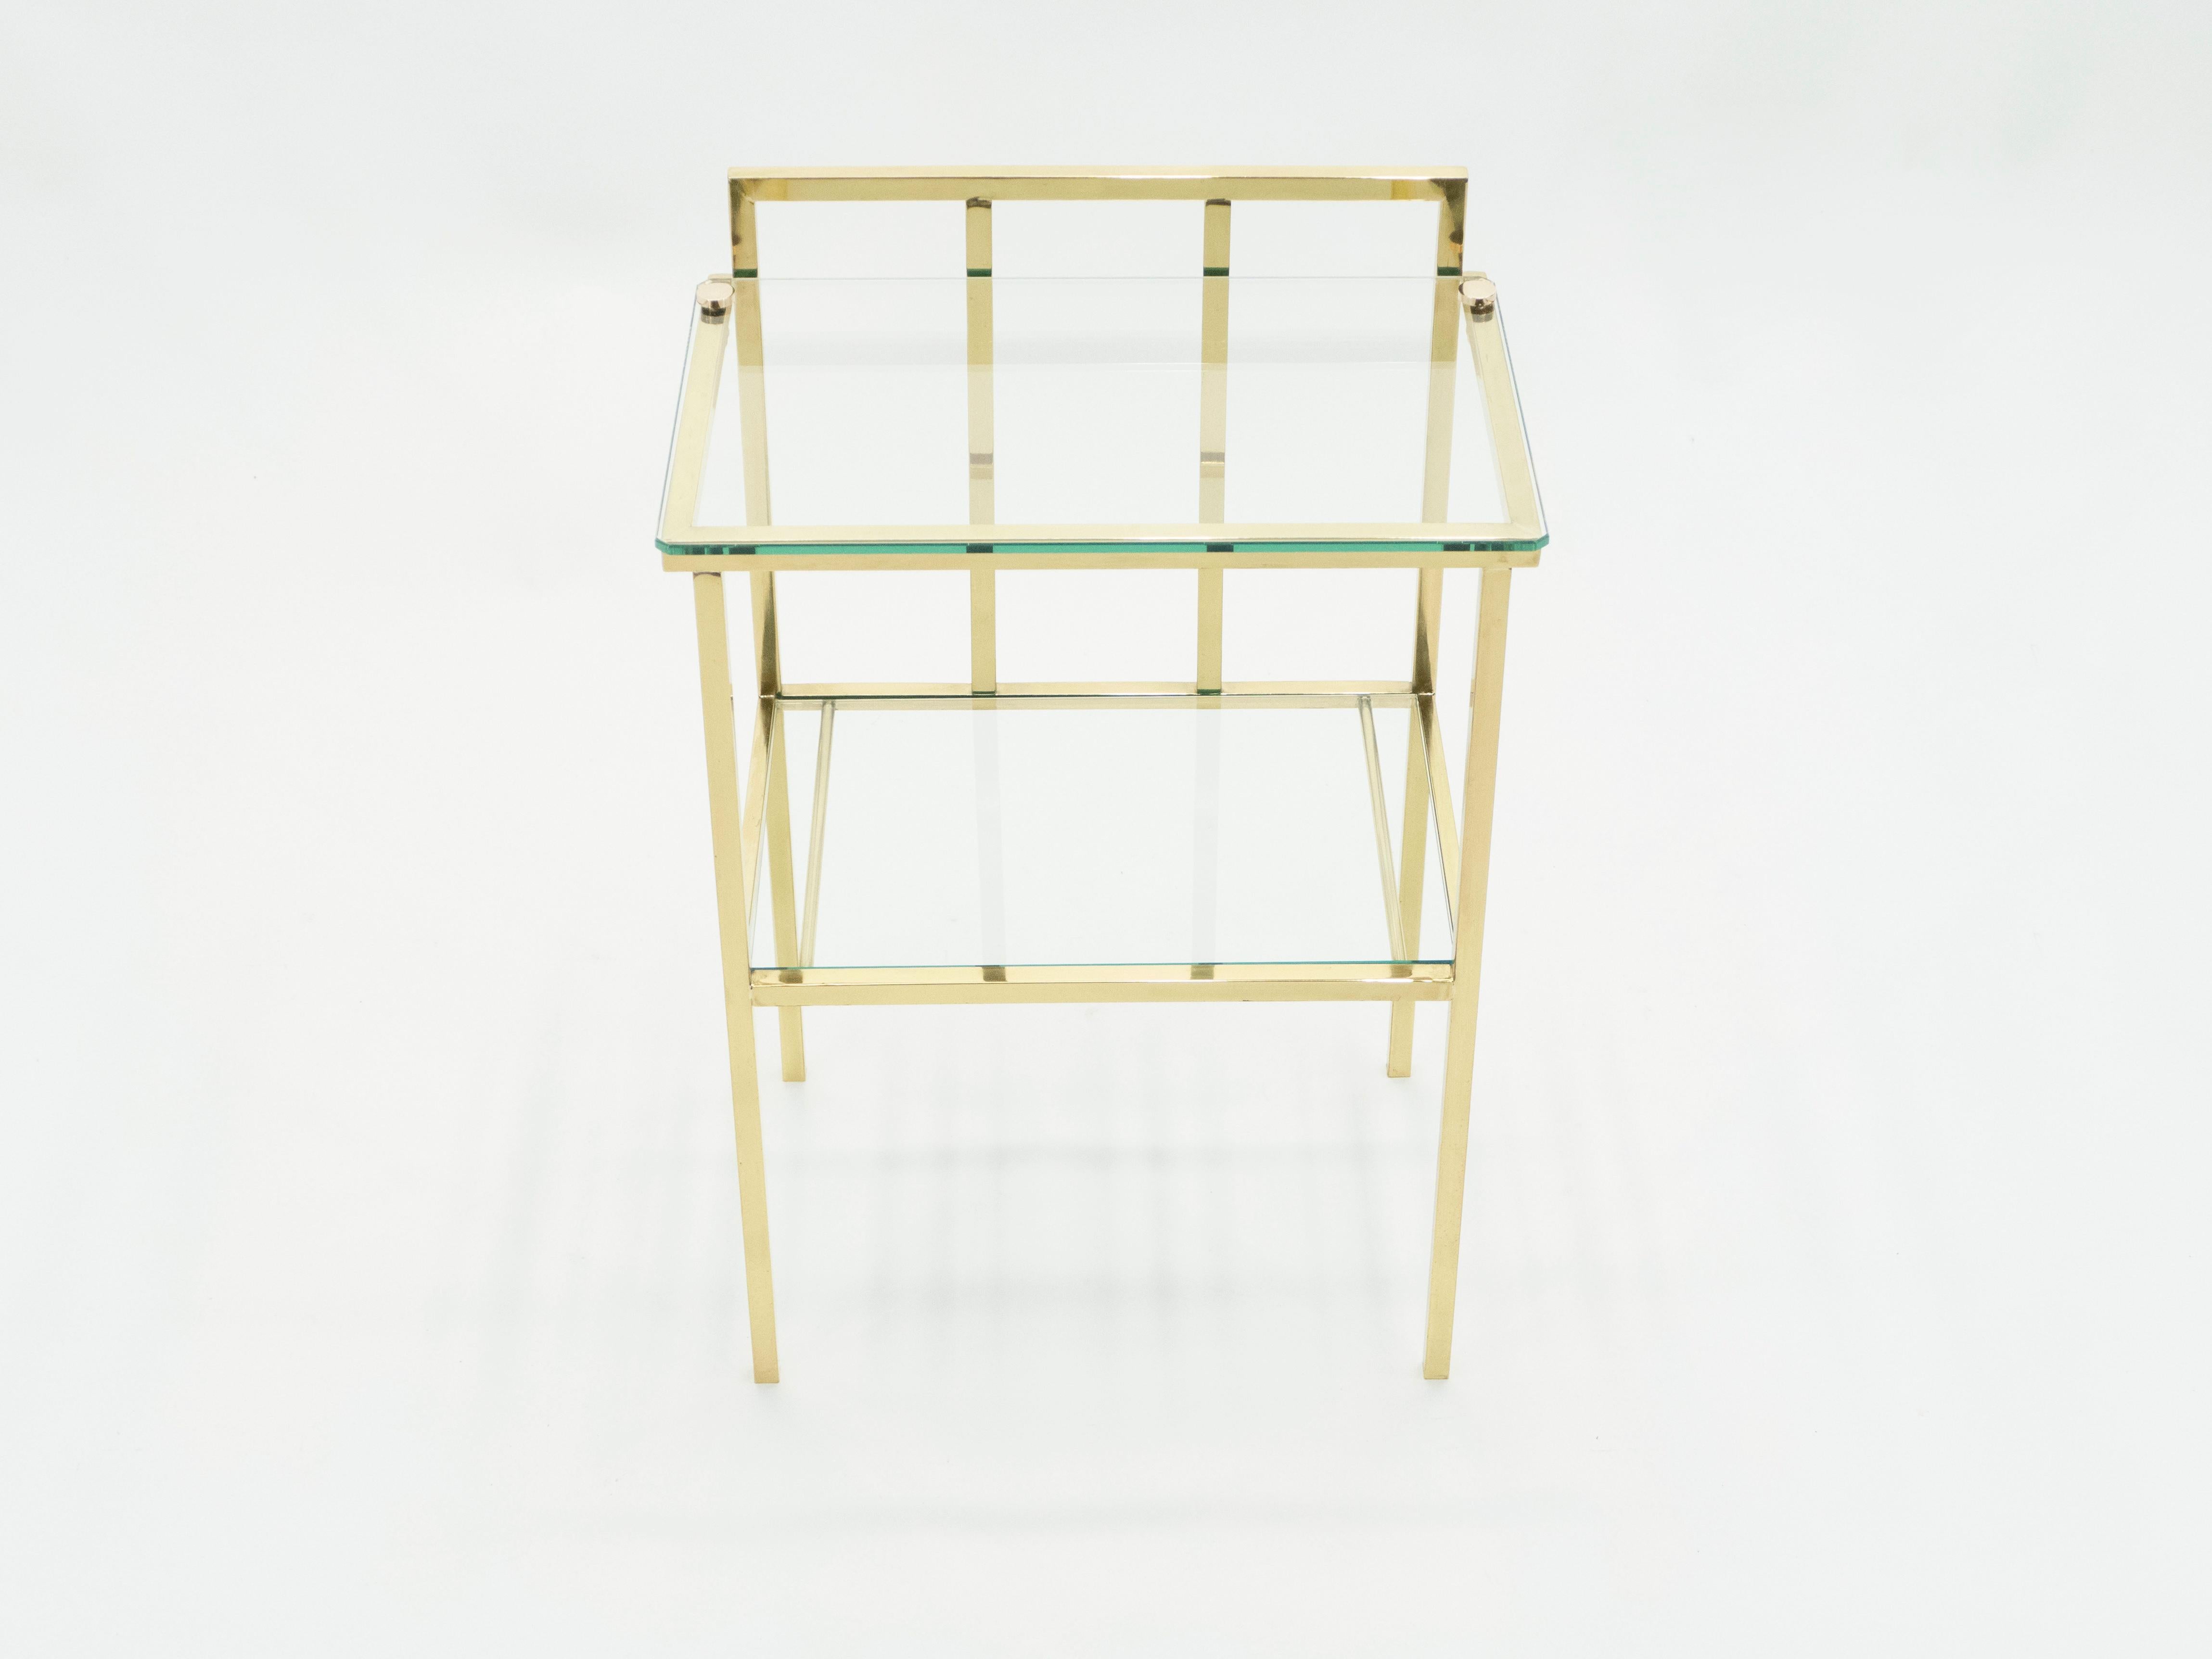 French Brass Two-Tier Glass End Tables Attributed to Marc du Plantier, 1960s For Sale 1